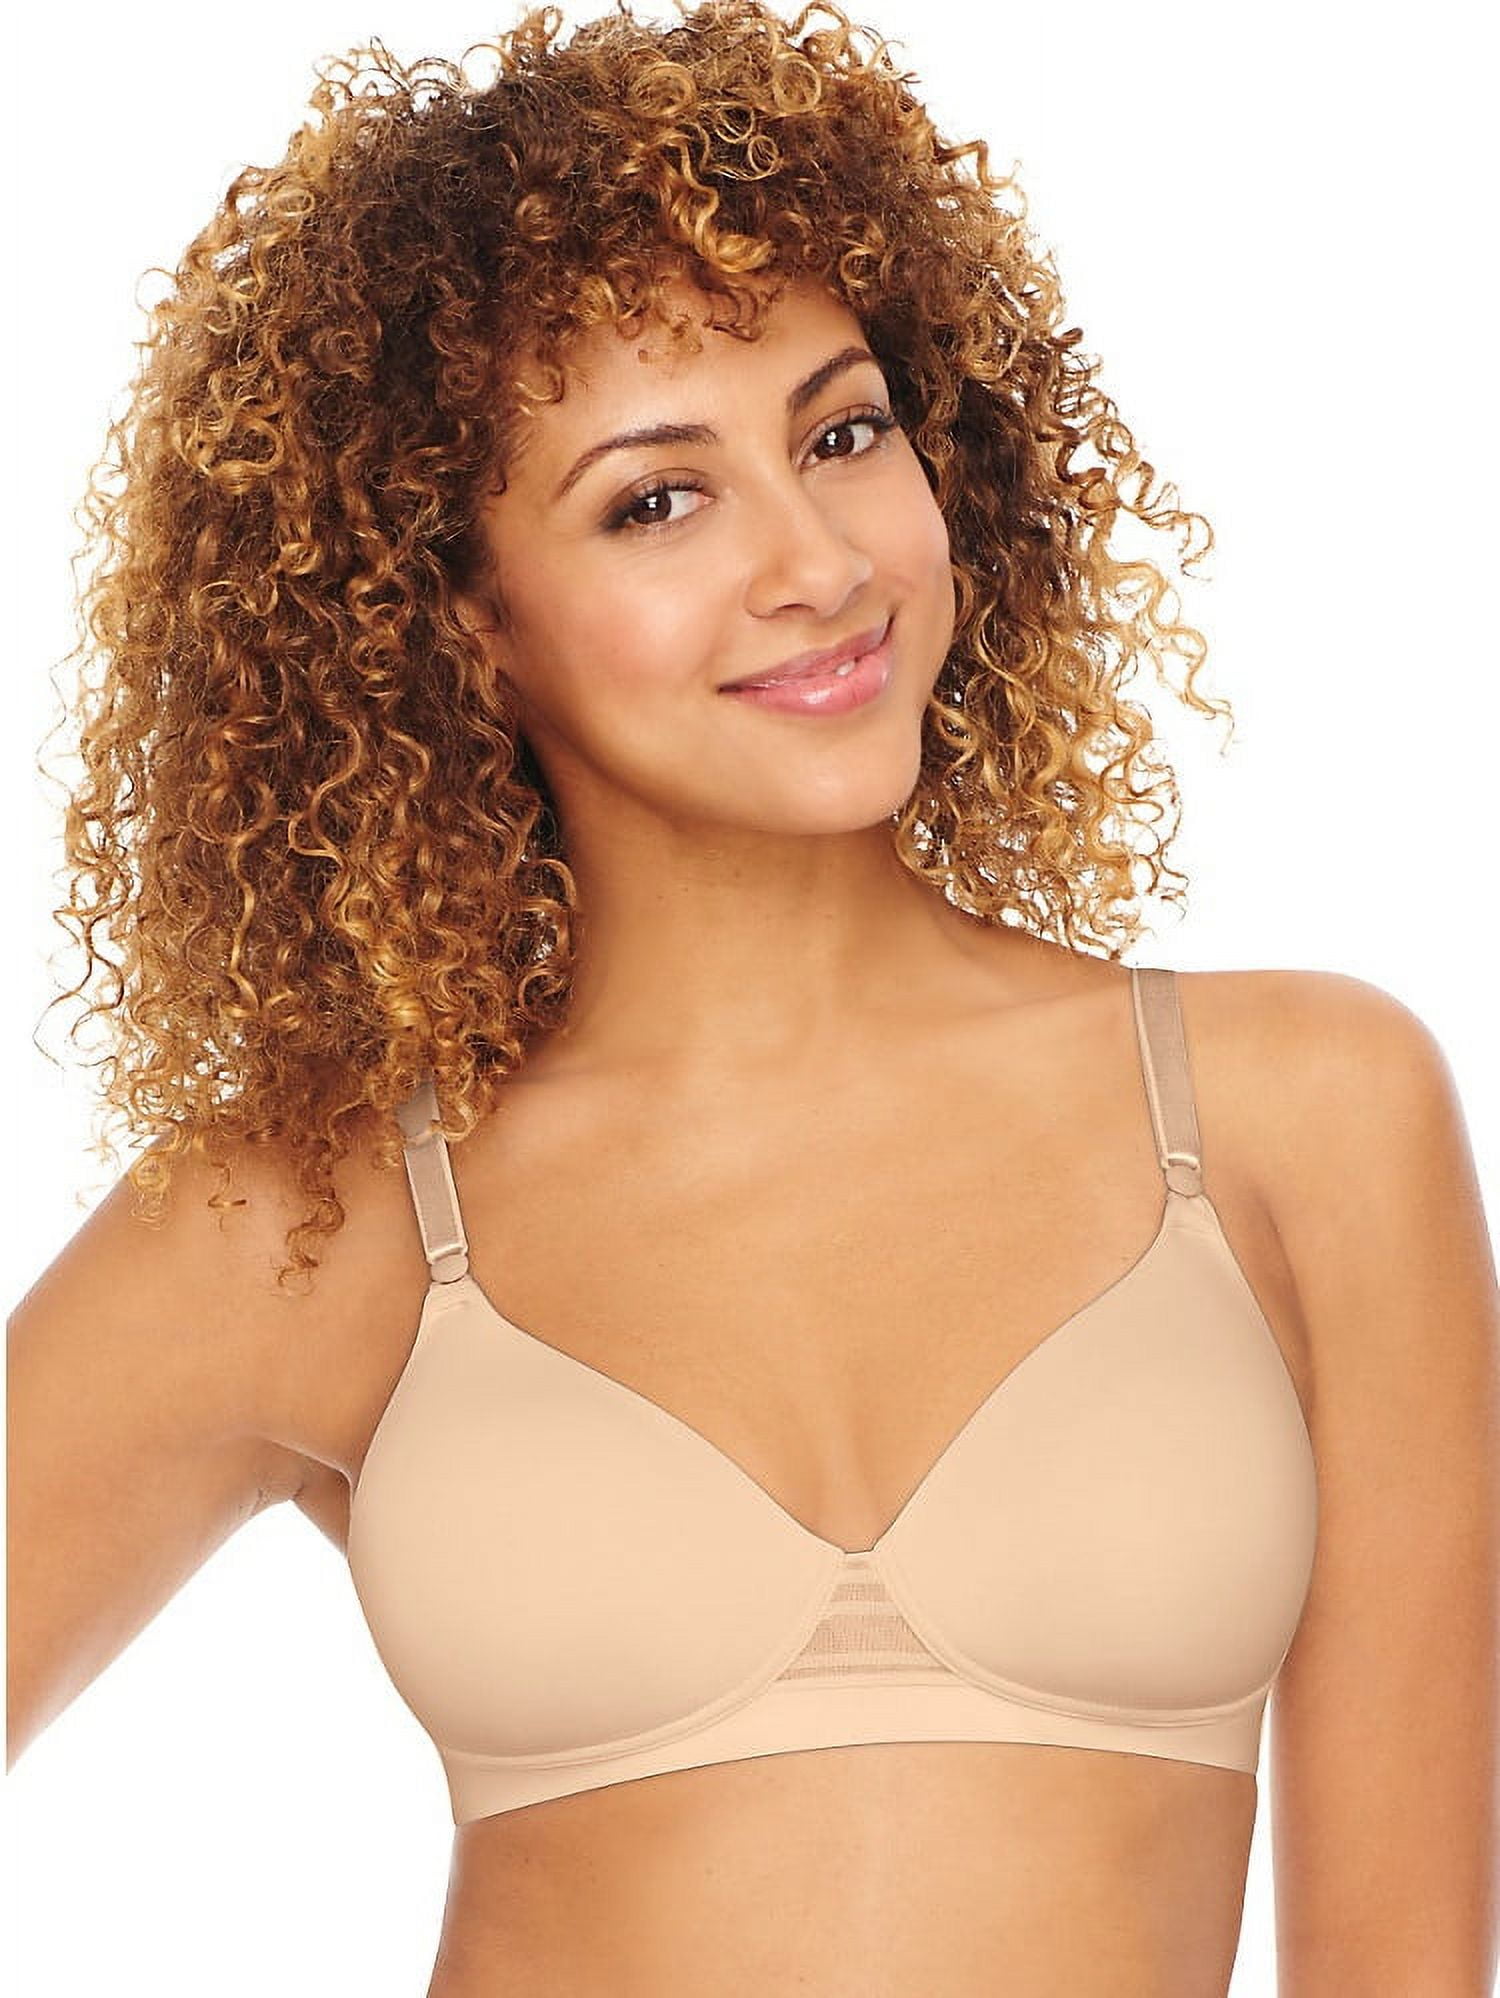 Hanes Womens full coverage Smootec Band Unlined Wireless Bra M